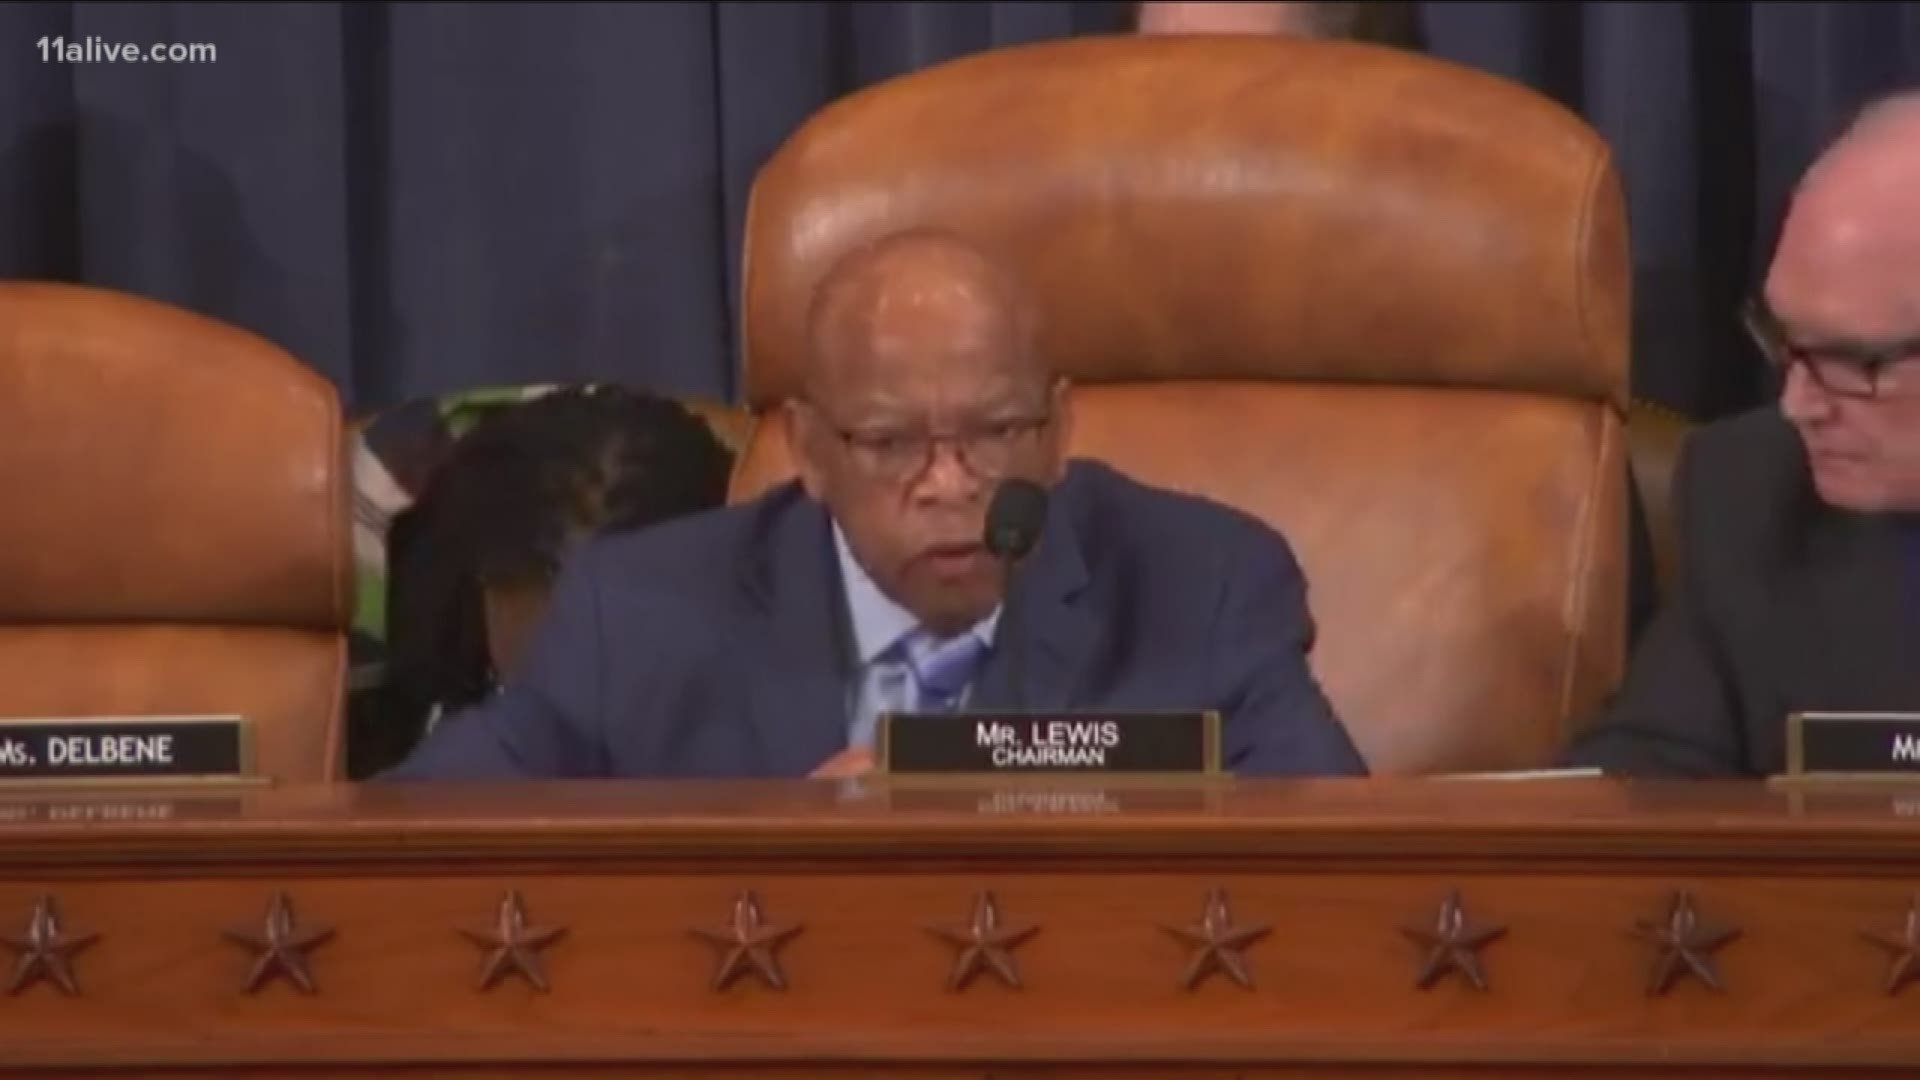 As Chairman of the powerful House Ways and Means Oversight Subcommittee, Lewis held a hearing on legislation that would force the President and Vice President to make their tax returns public.